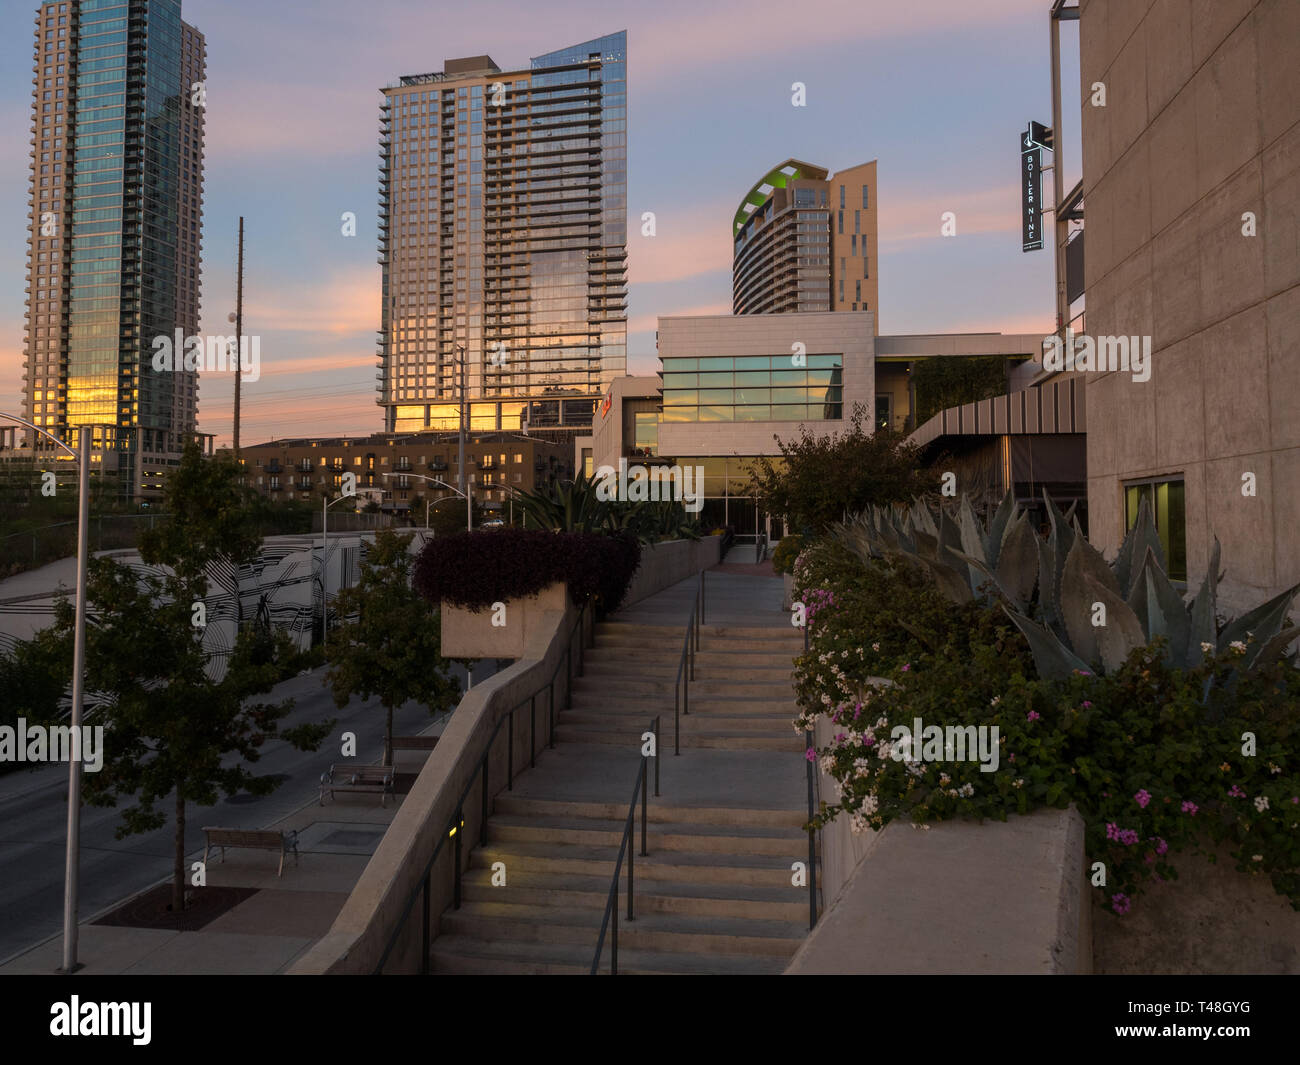 Seaholm District in Downtown Austin, Texas at Sunset Stock Photo